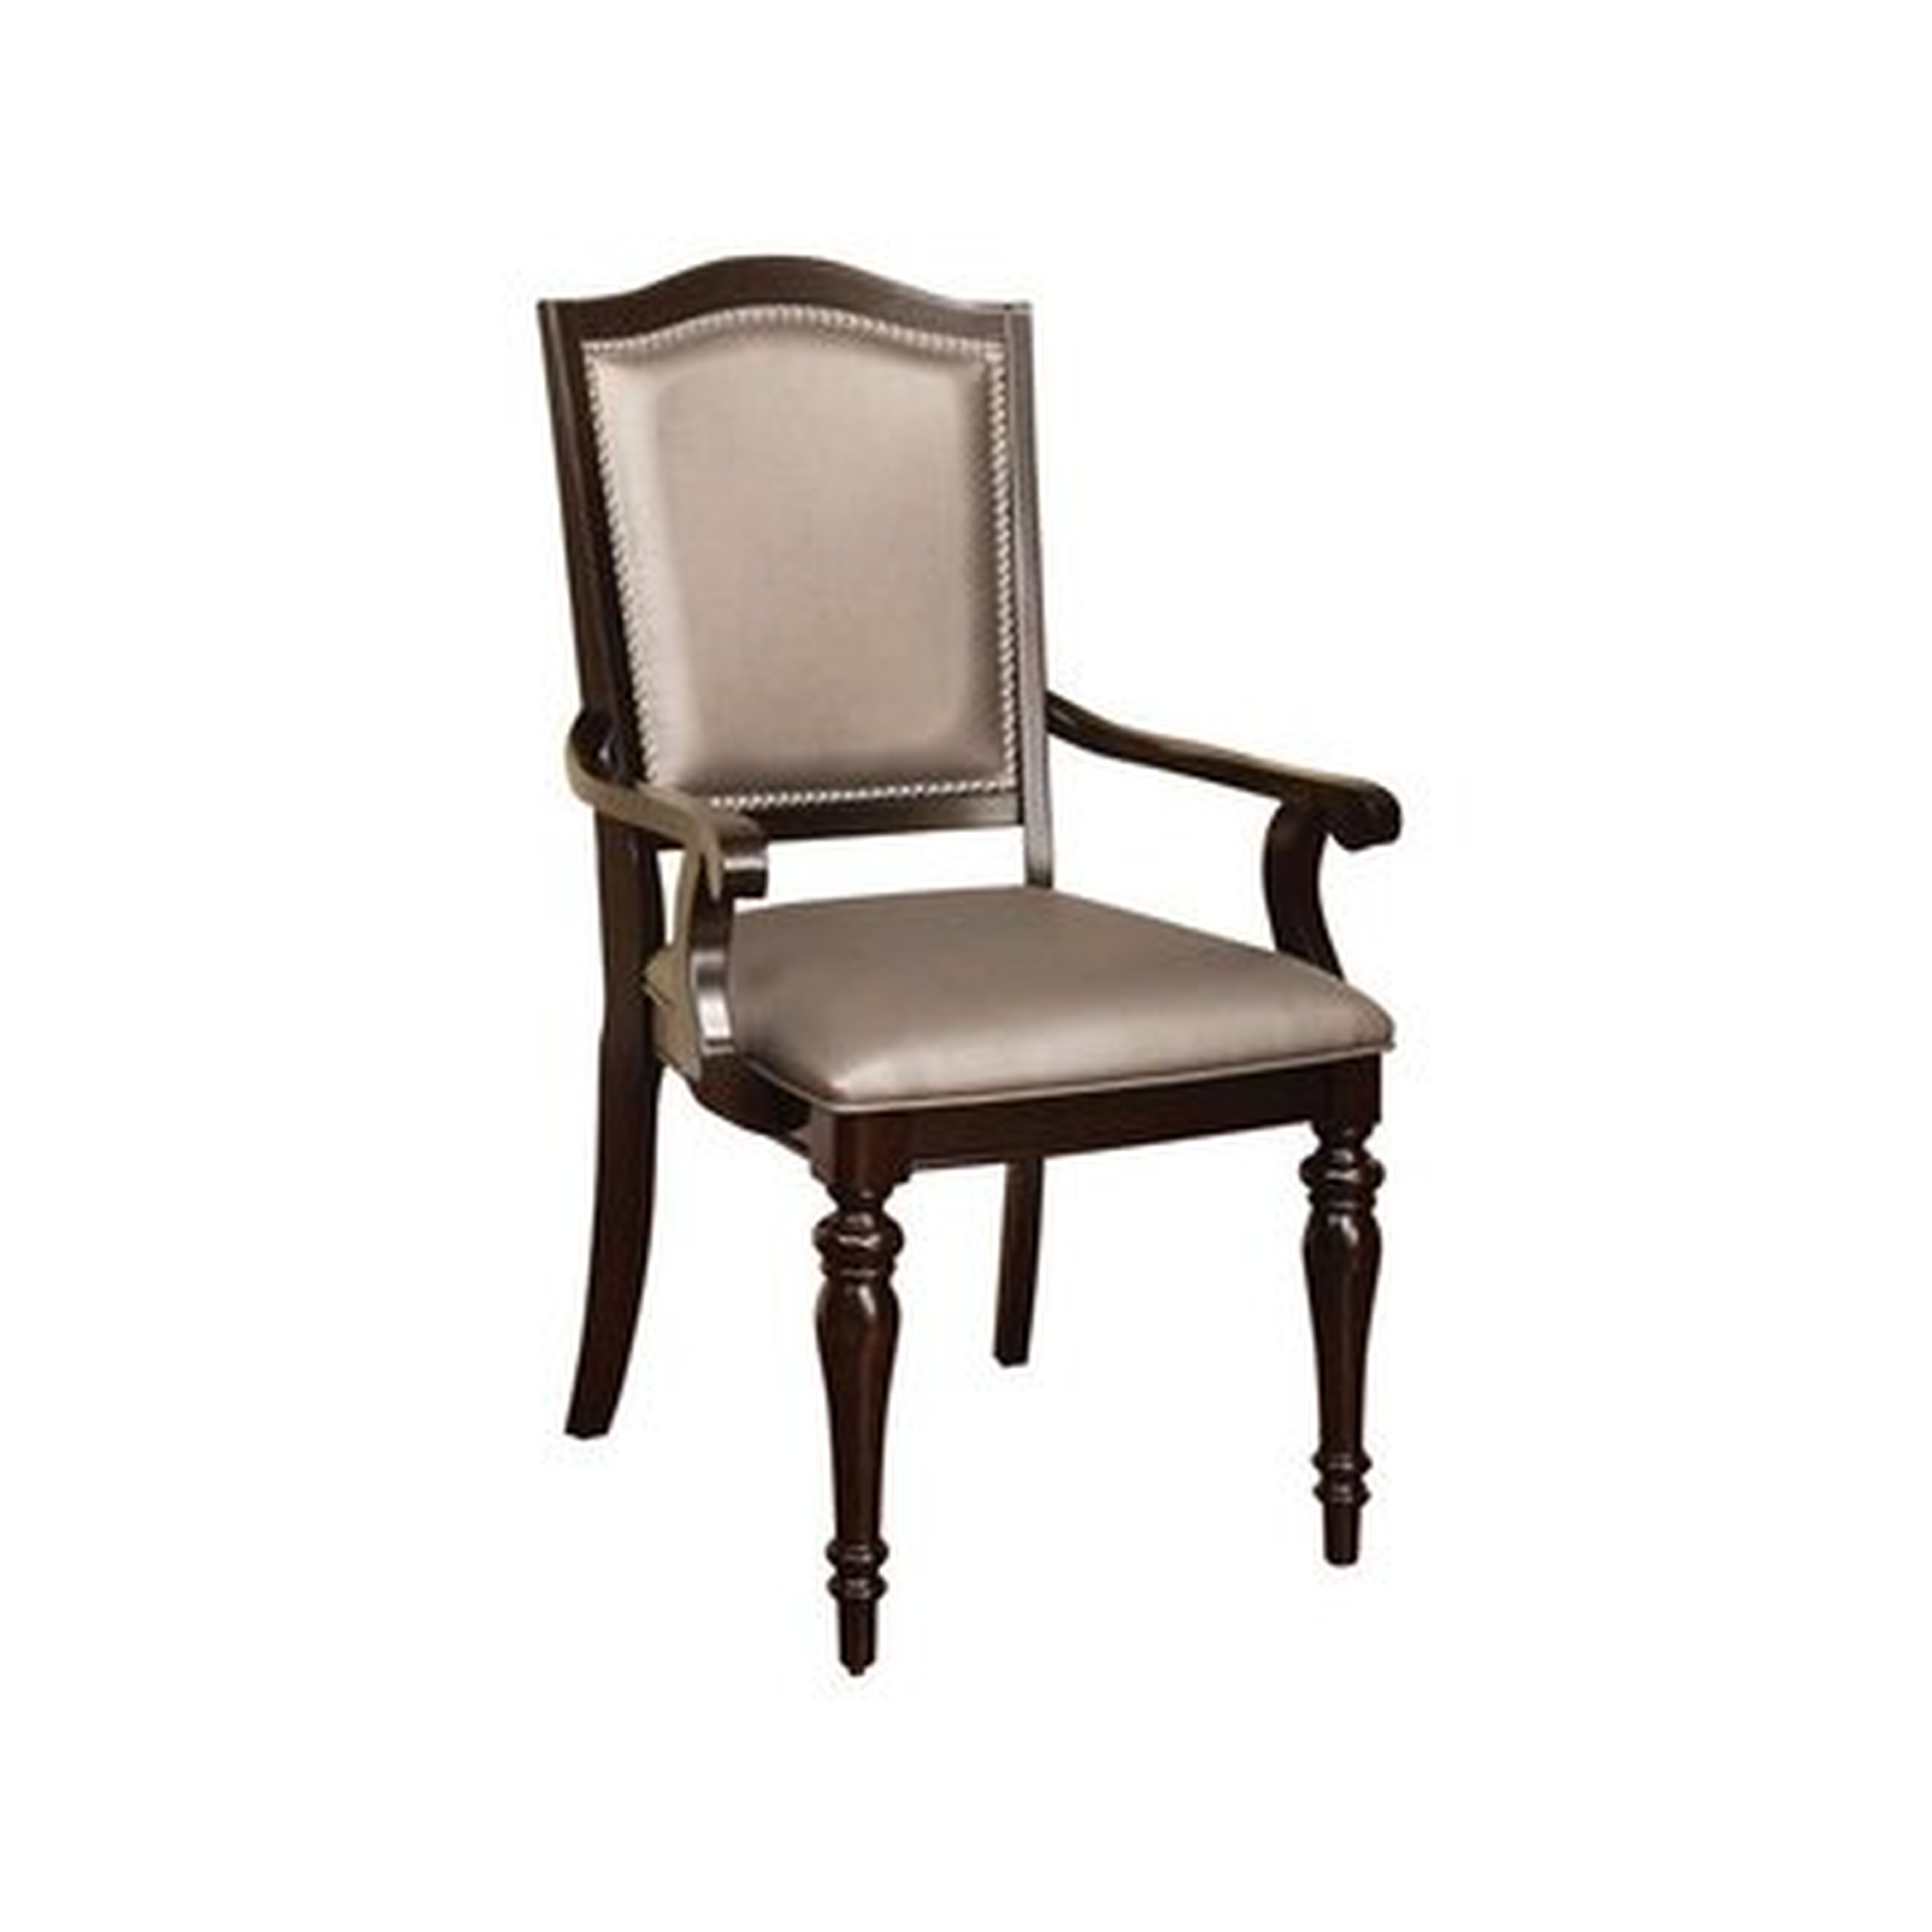 Ristaino Upholstered Solid Wood King Louis Back Arm chair in Dark Walnut - Wayfair